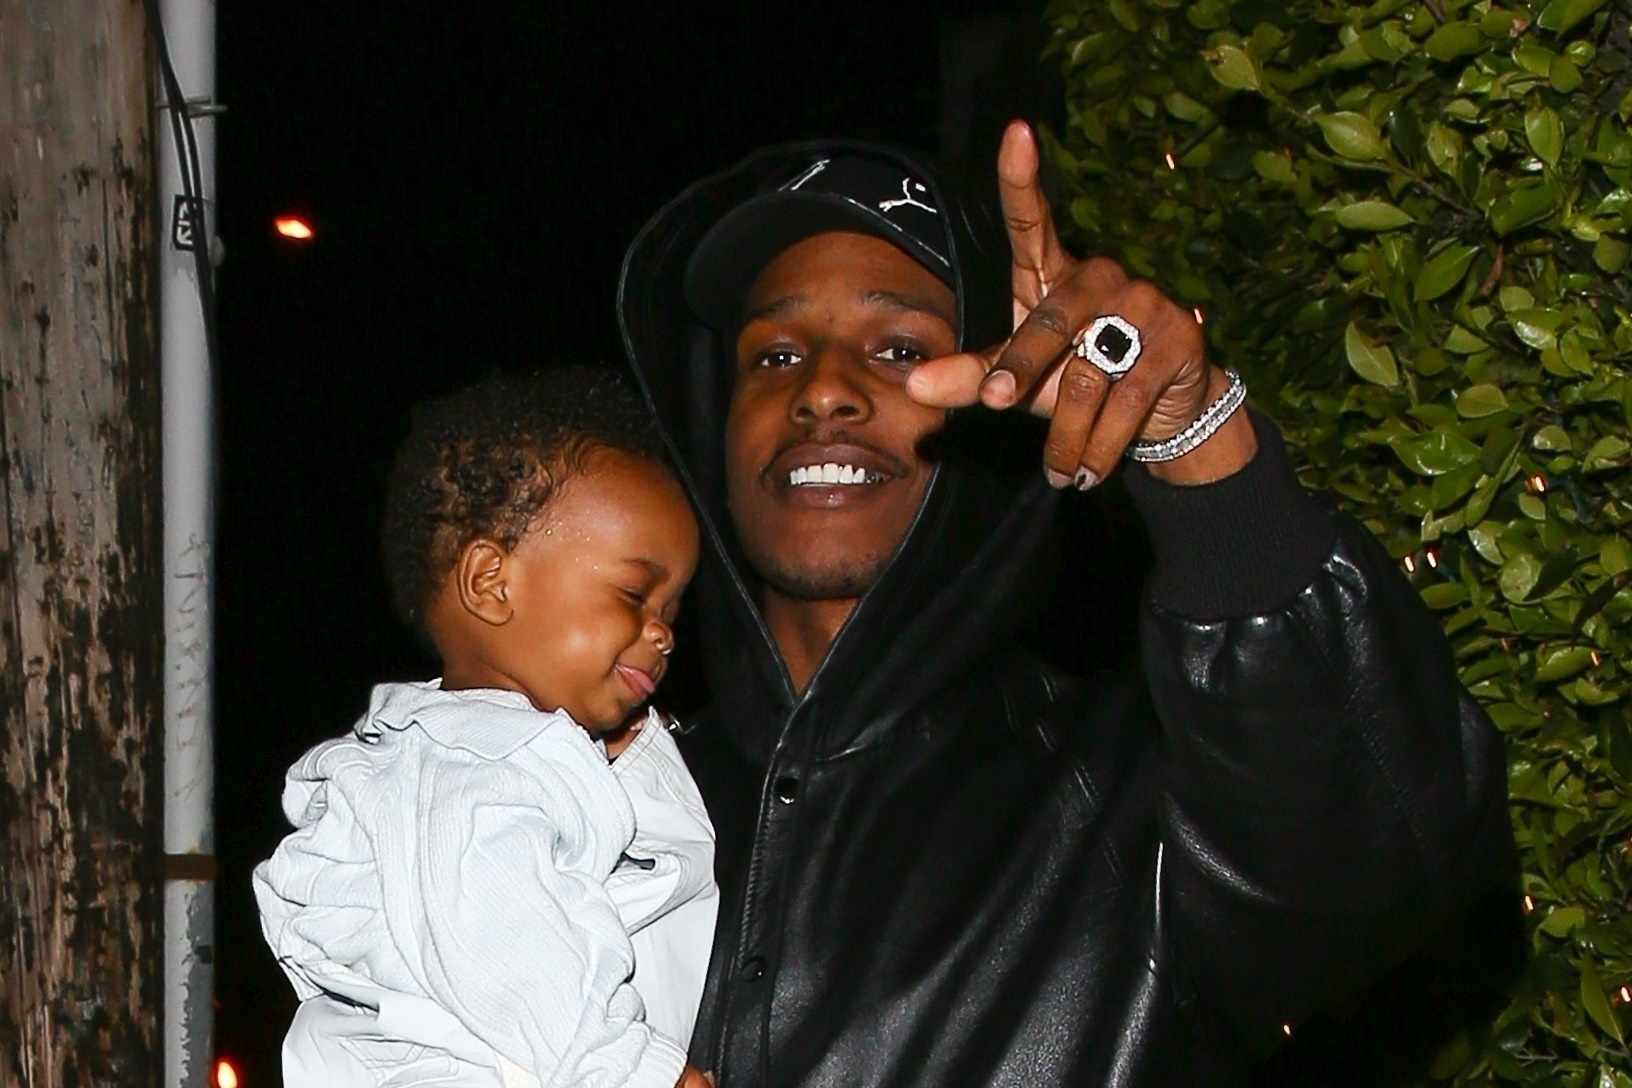 A$AP Rocky is seen wearing a black hoodie & PUMA hat holding his son RZA